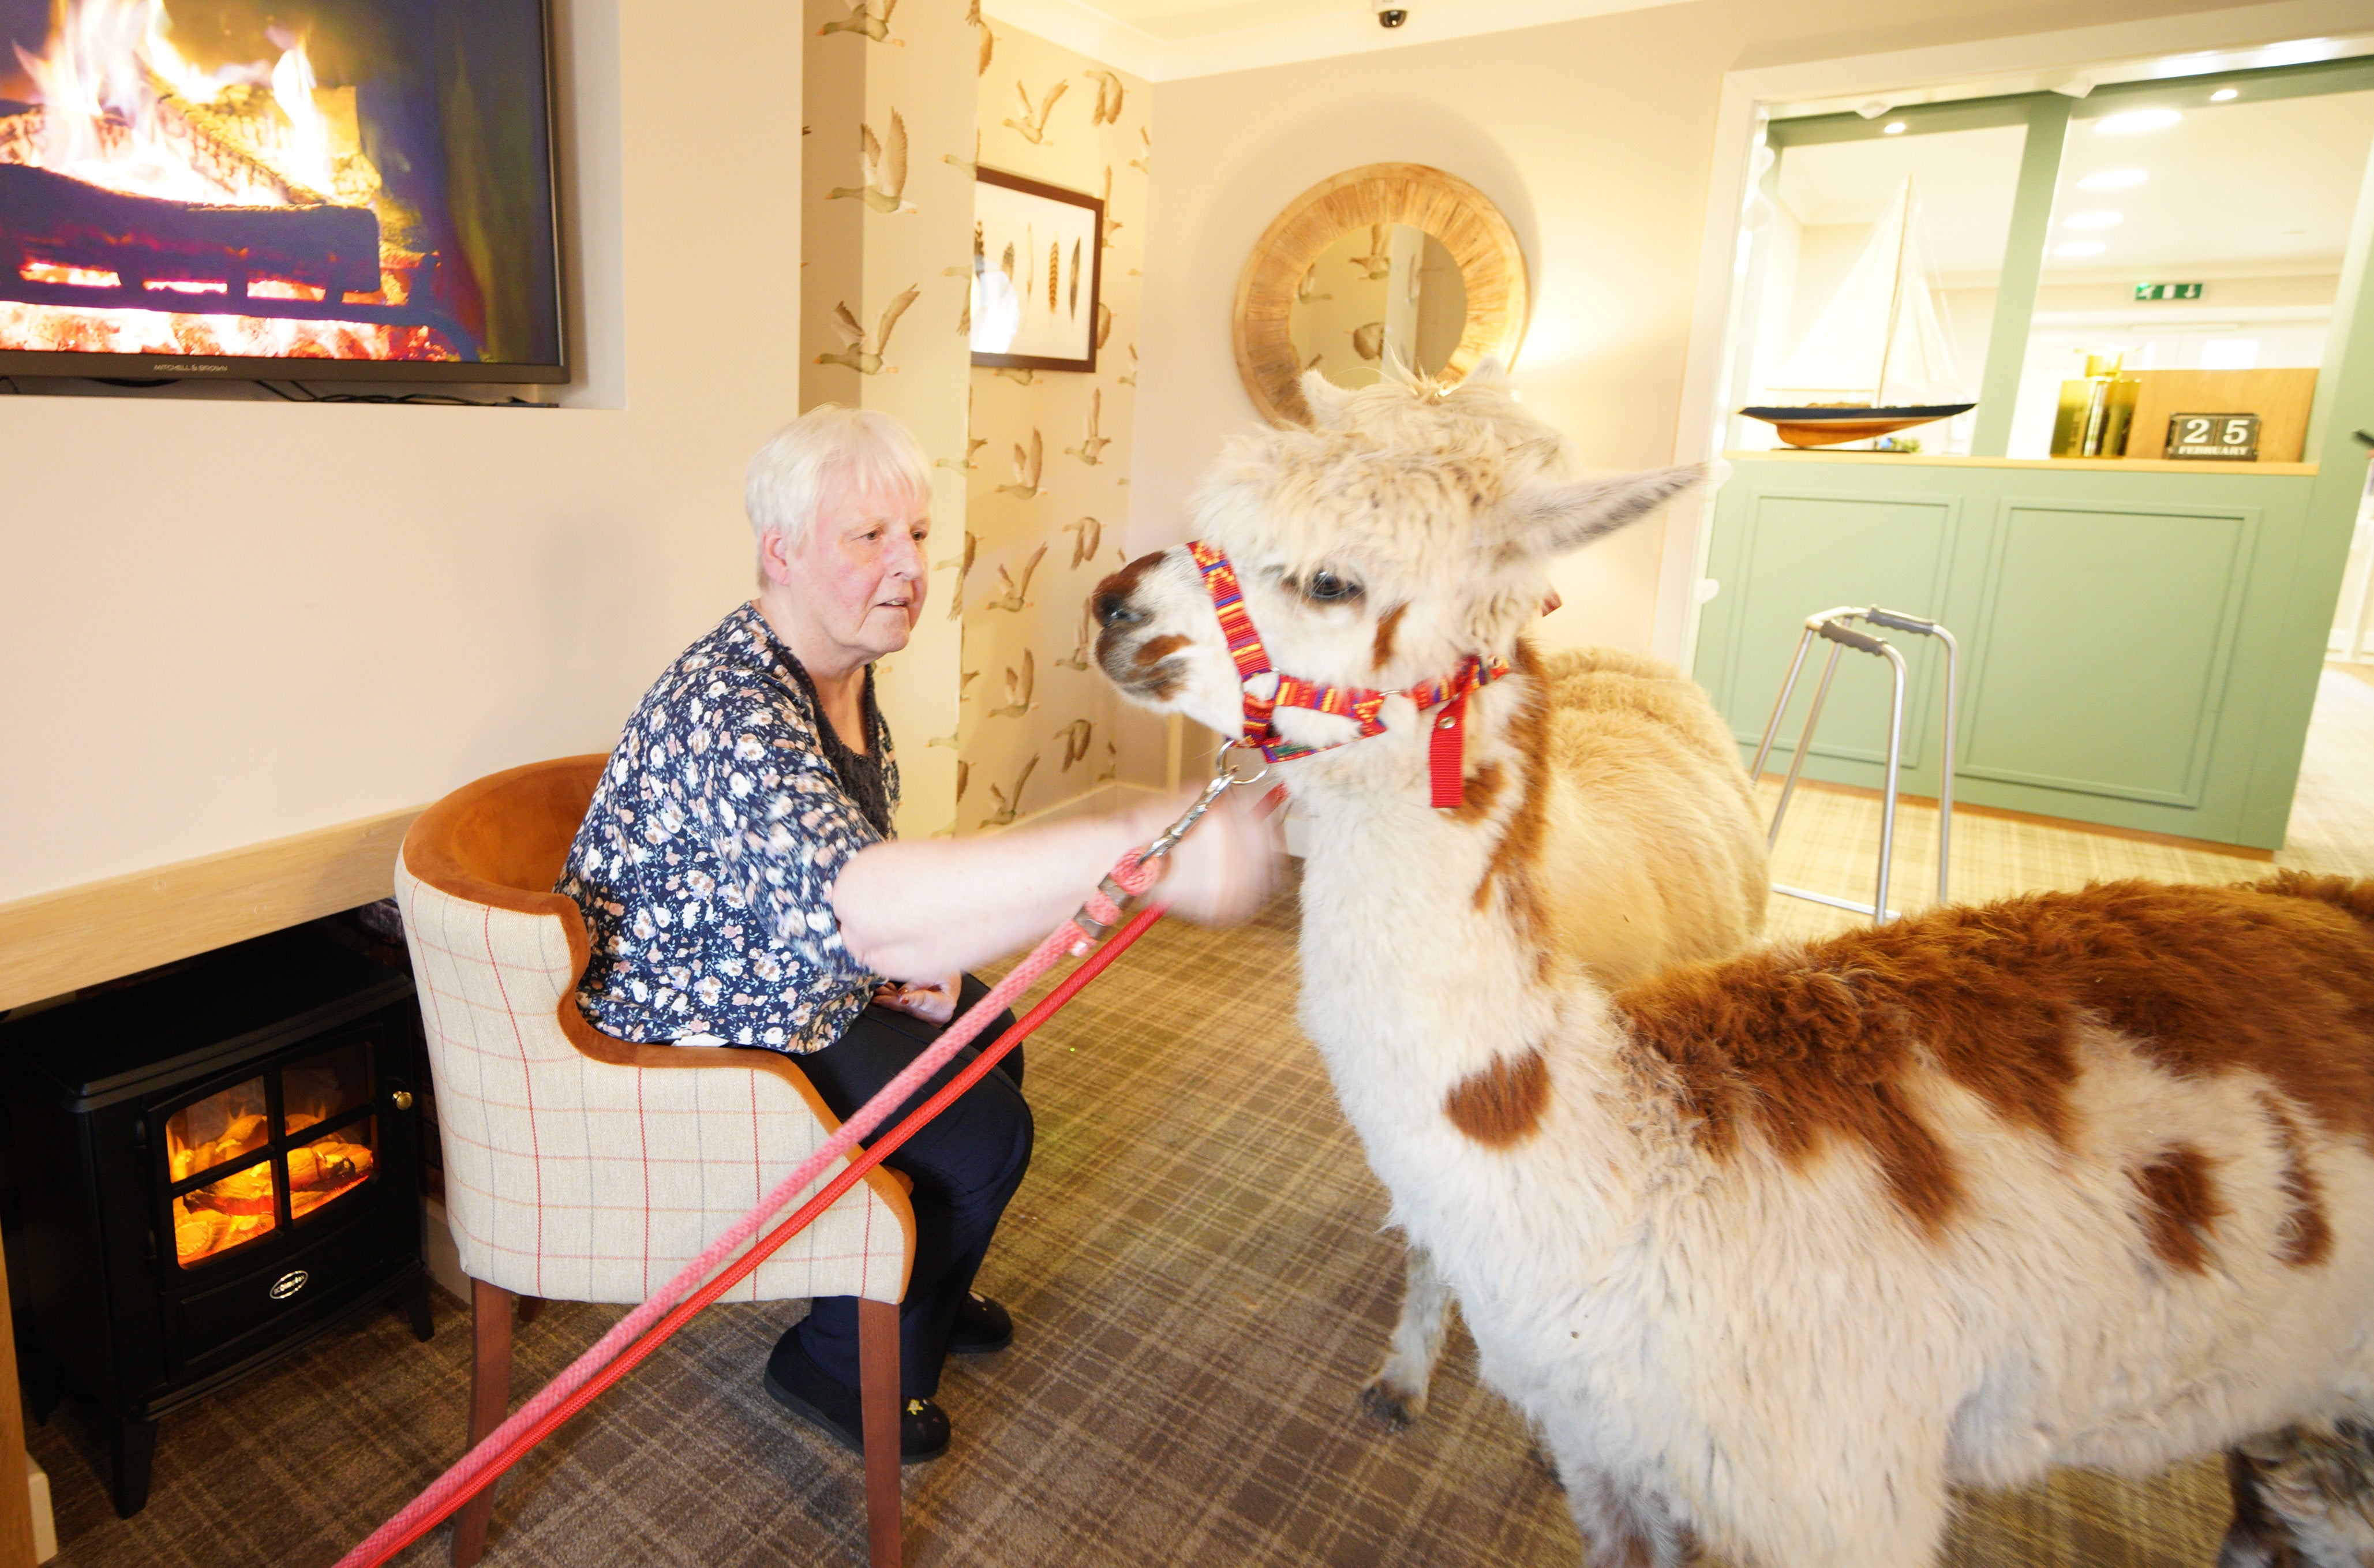 Resident Merrill Simcox at the Oaks Care Home in Newtown, Powys (PA)